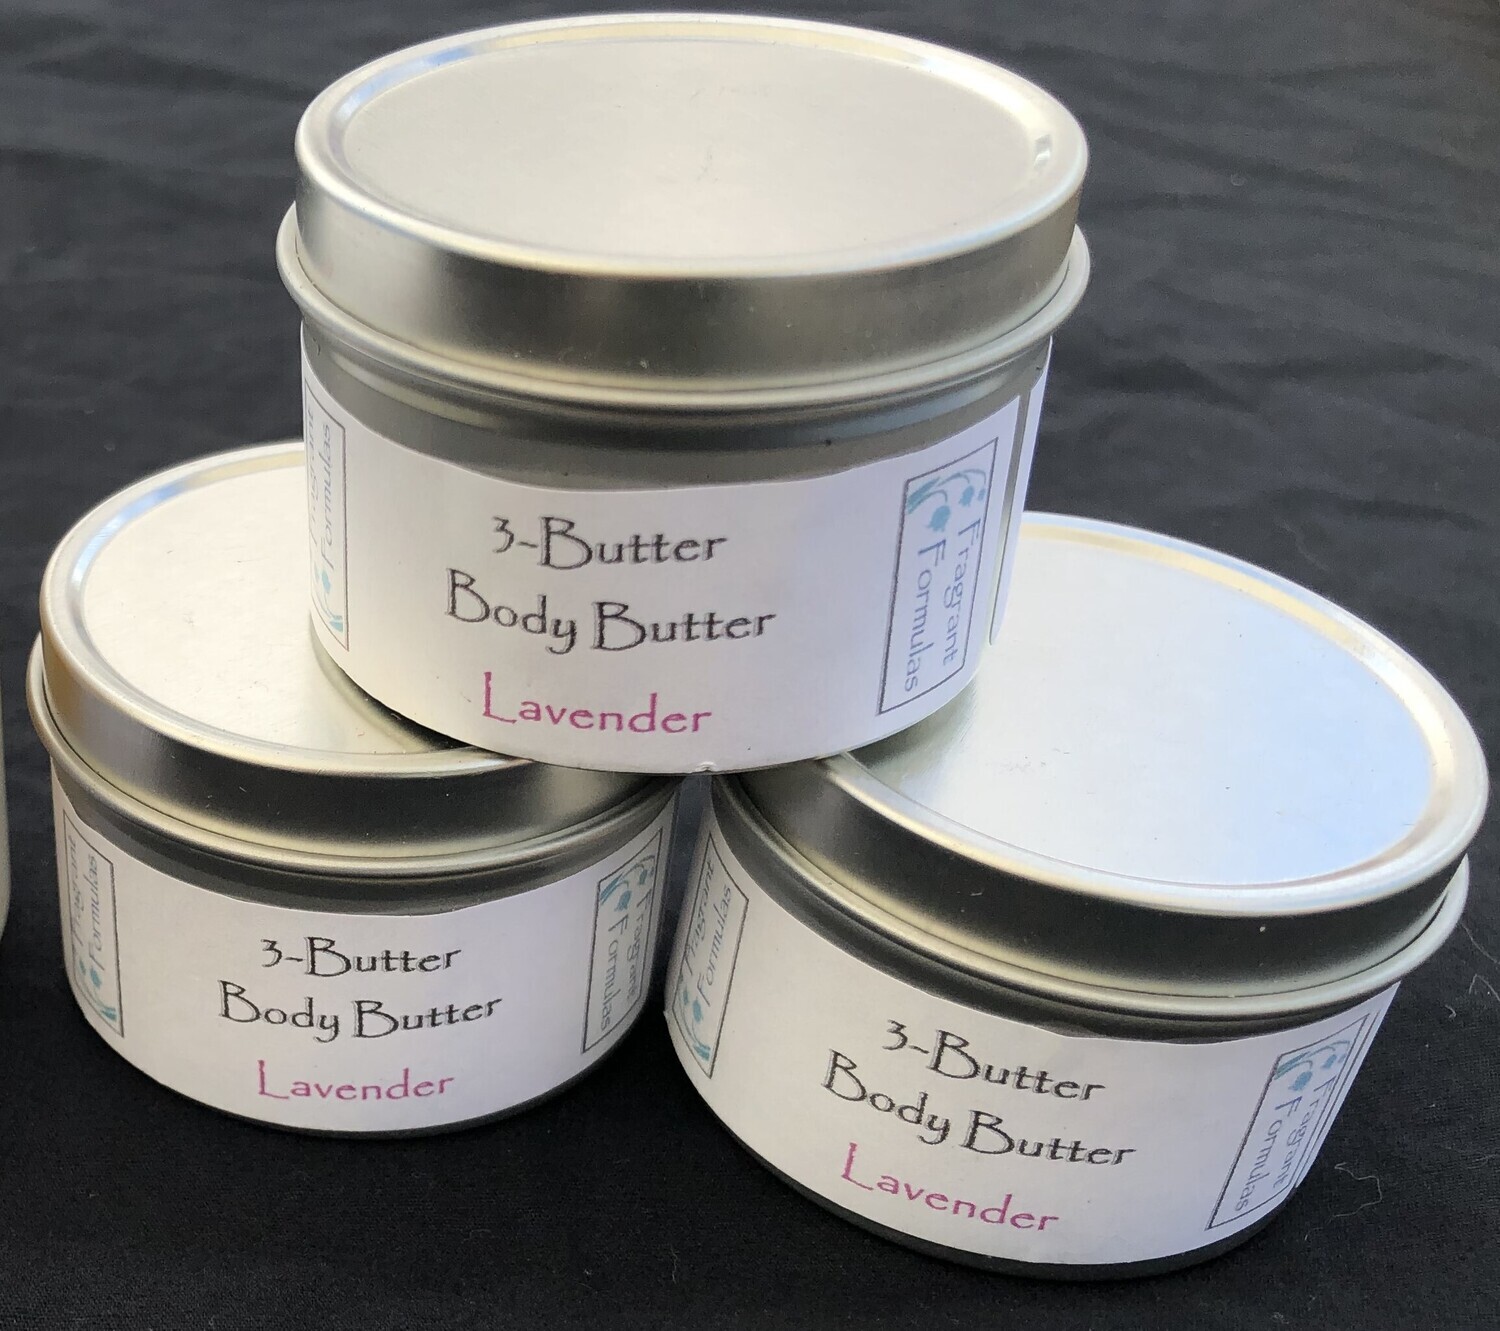 3-Butter Body Butter, Lavender Scent, 1.6 ounce